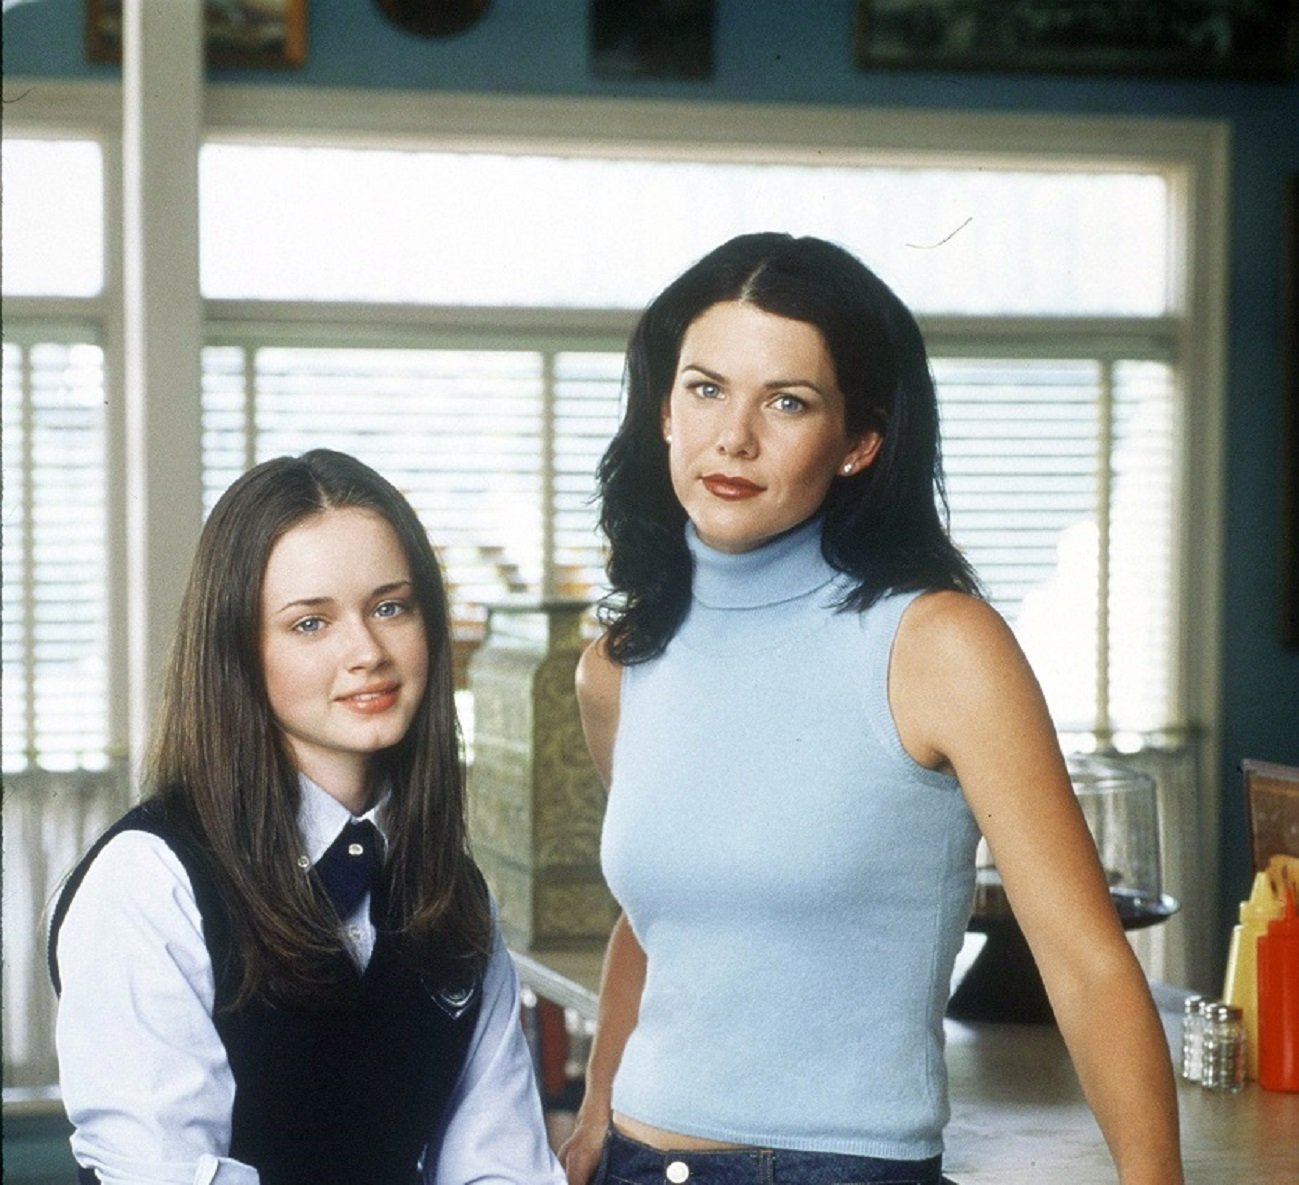 Alexis Bledel and Lauren Graham pose together in Luke's Diner, the scene of many 'Gilmore Girls' coffee moments